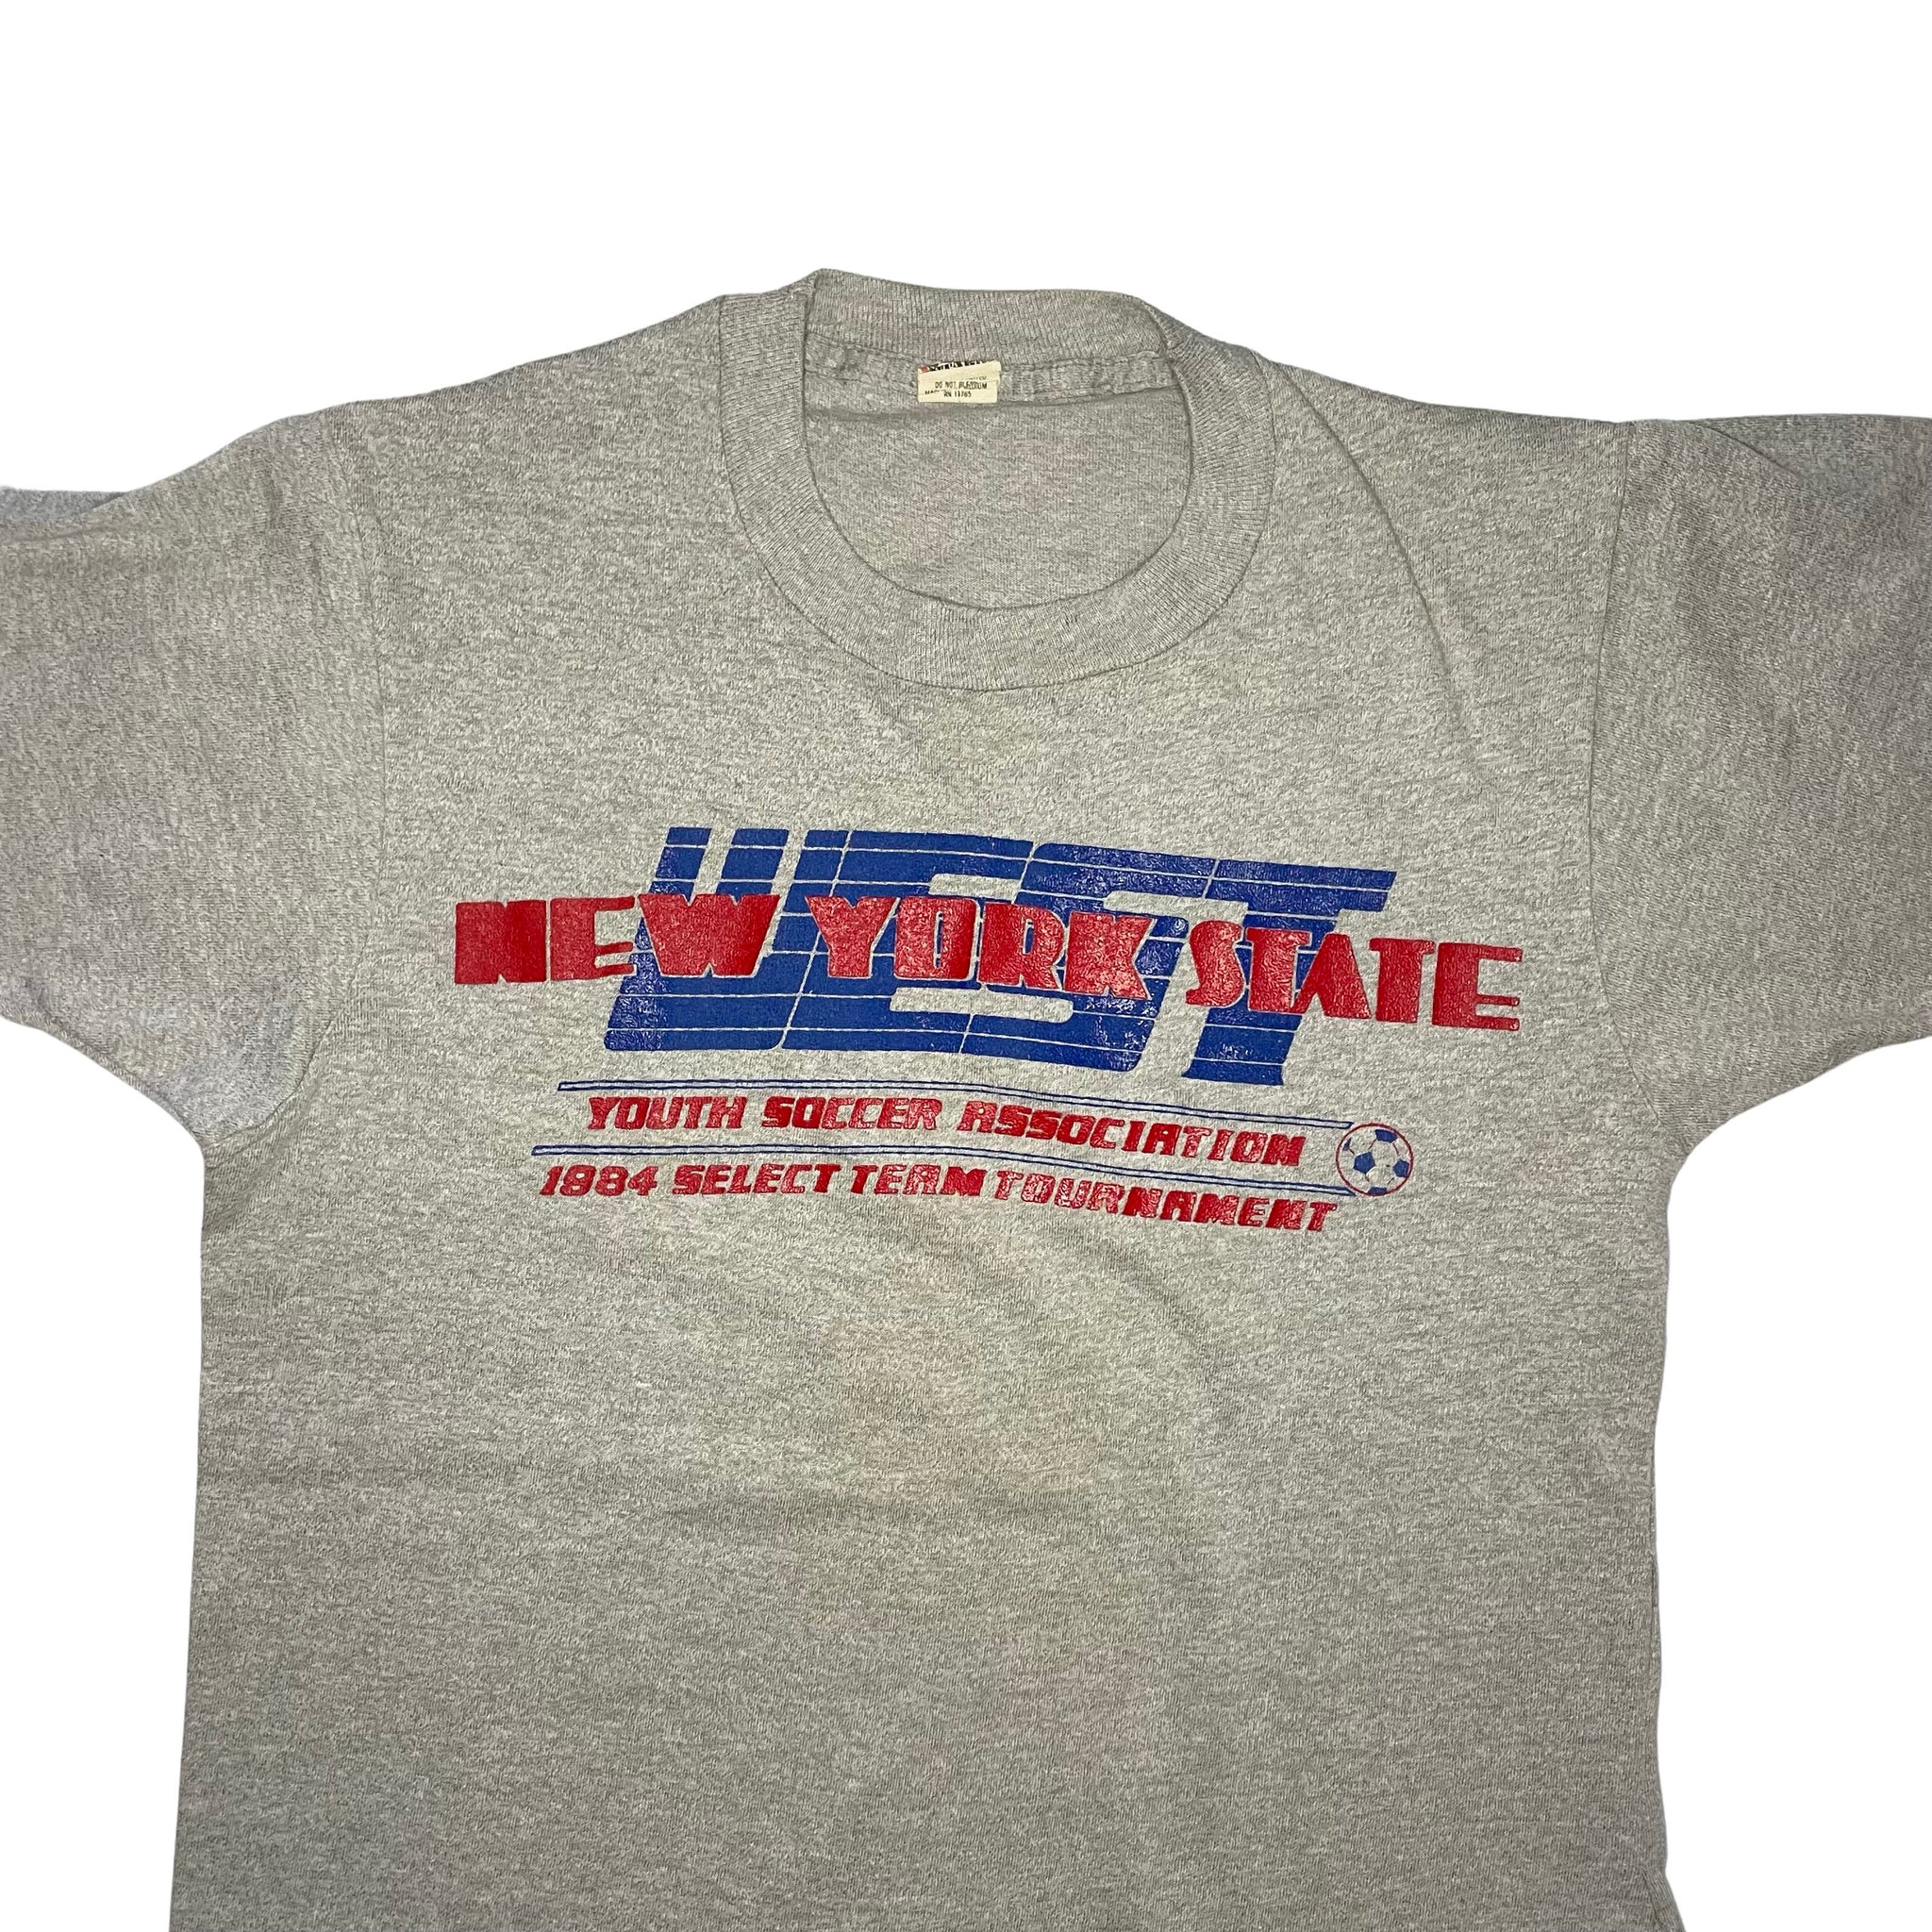 1984 New York State Select Tournament T-Shirt - S